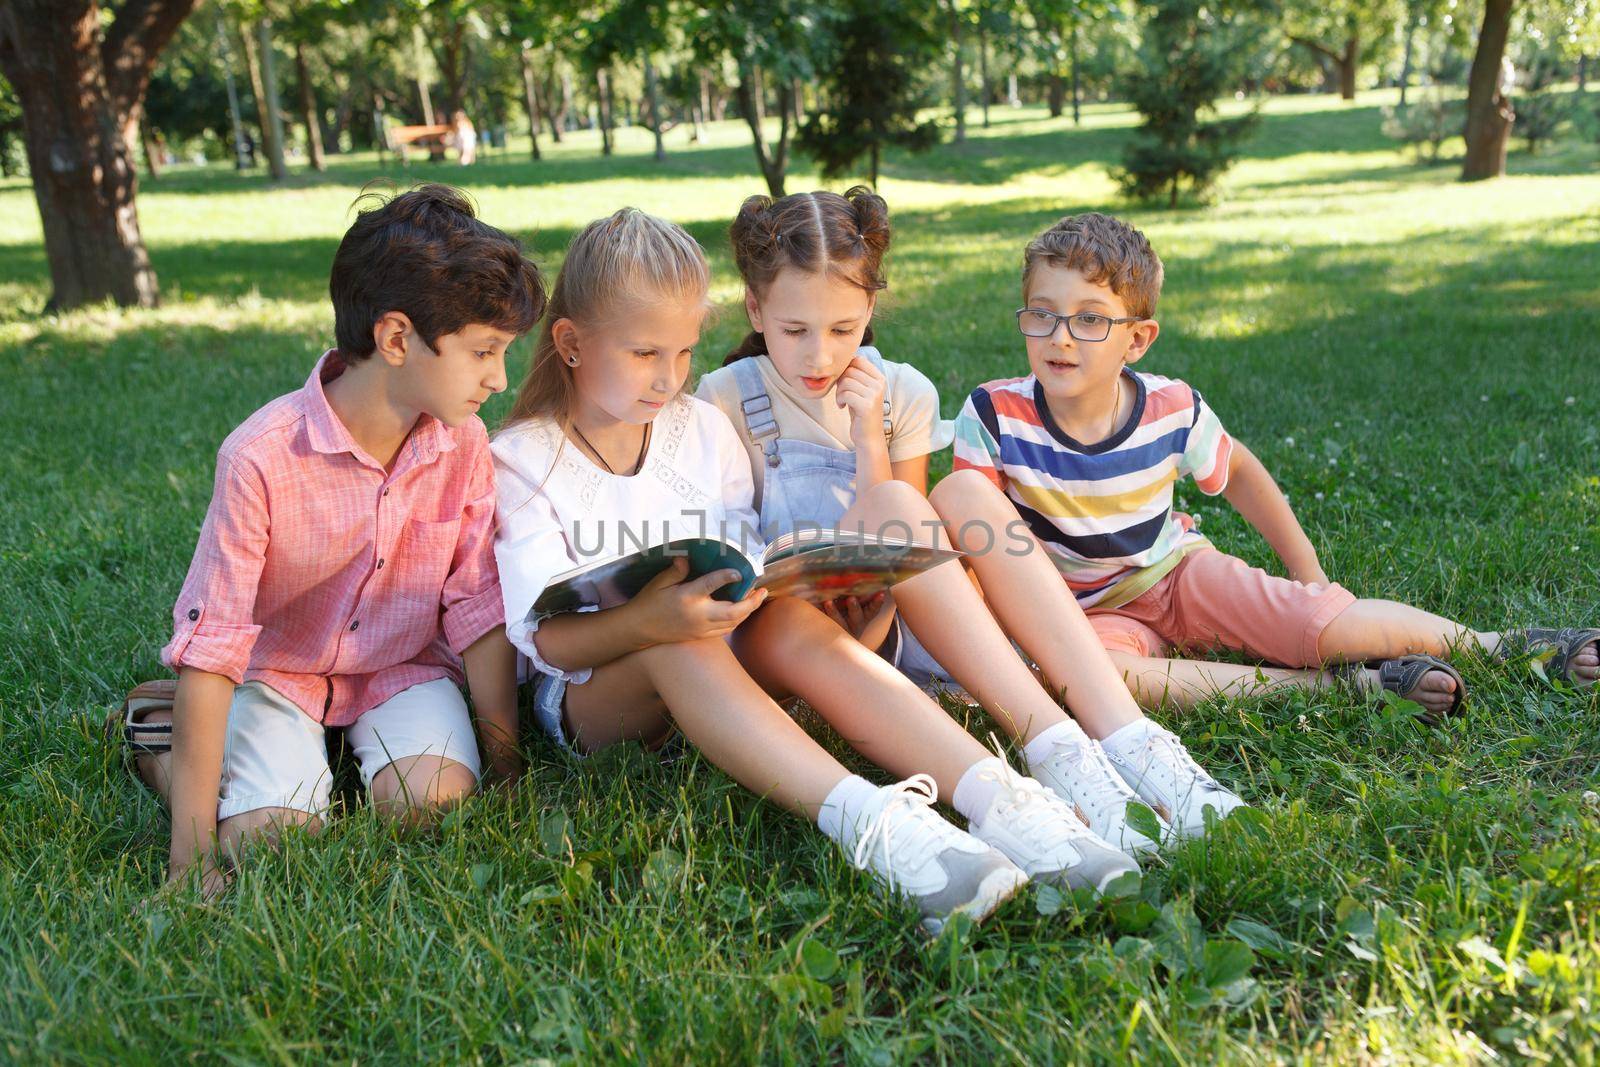 Group of kids reading a book together outdoors in the park